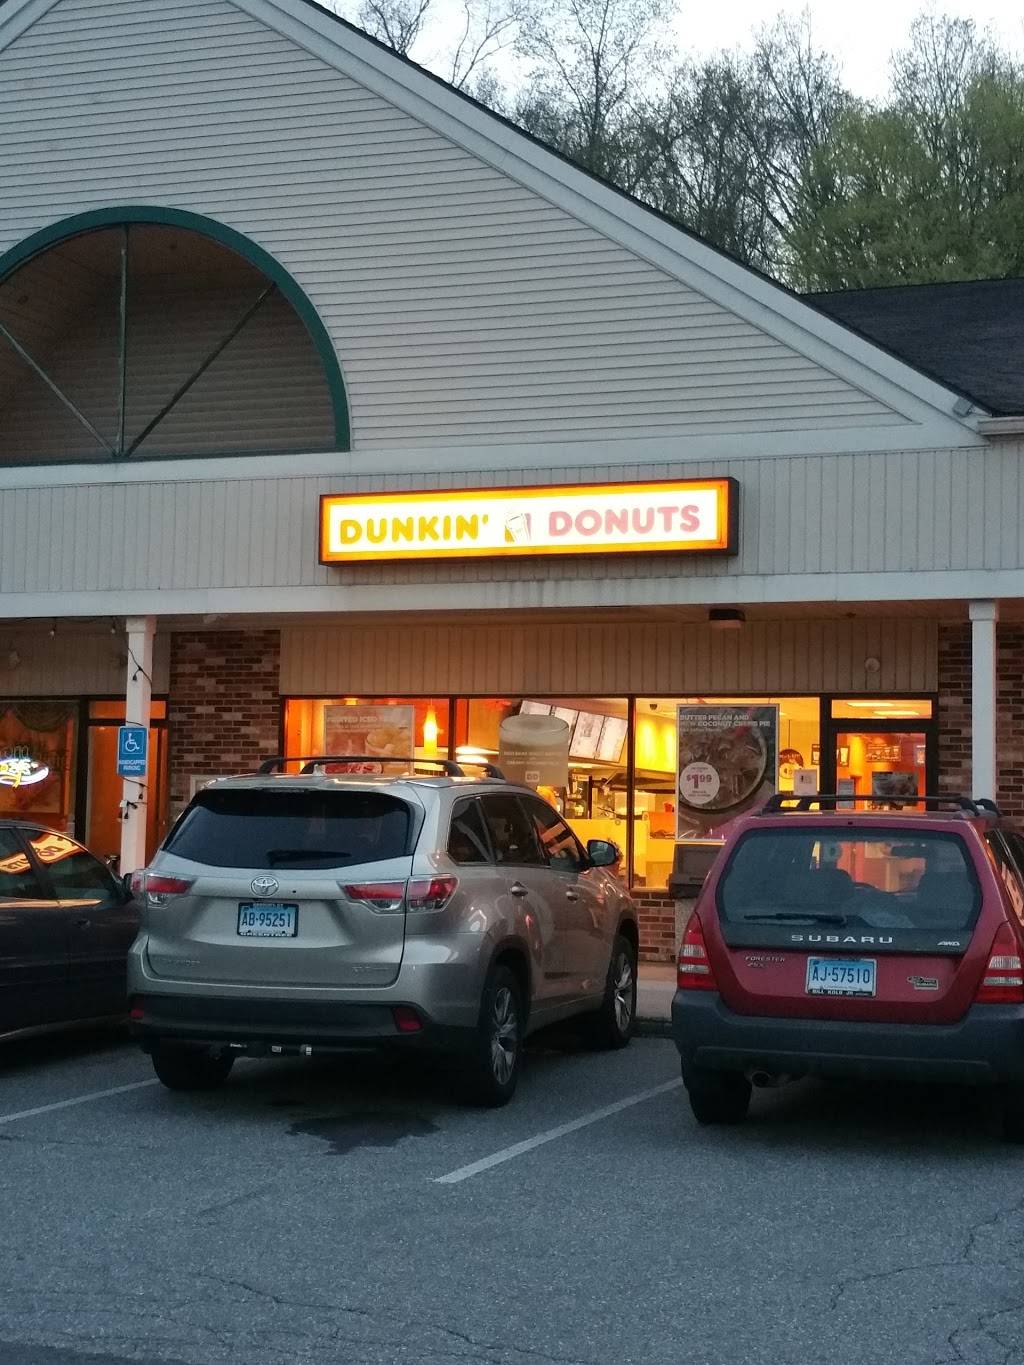 Dunkin Donuts | cafe | 270 Federal Rd, Brookfield, CT 06804, USA | 2037753884 OR +1 203-775-3884